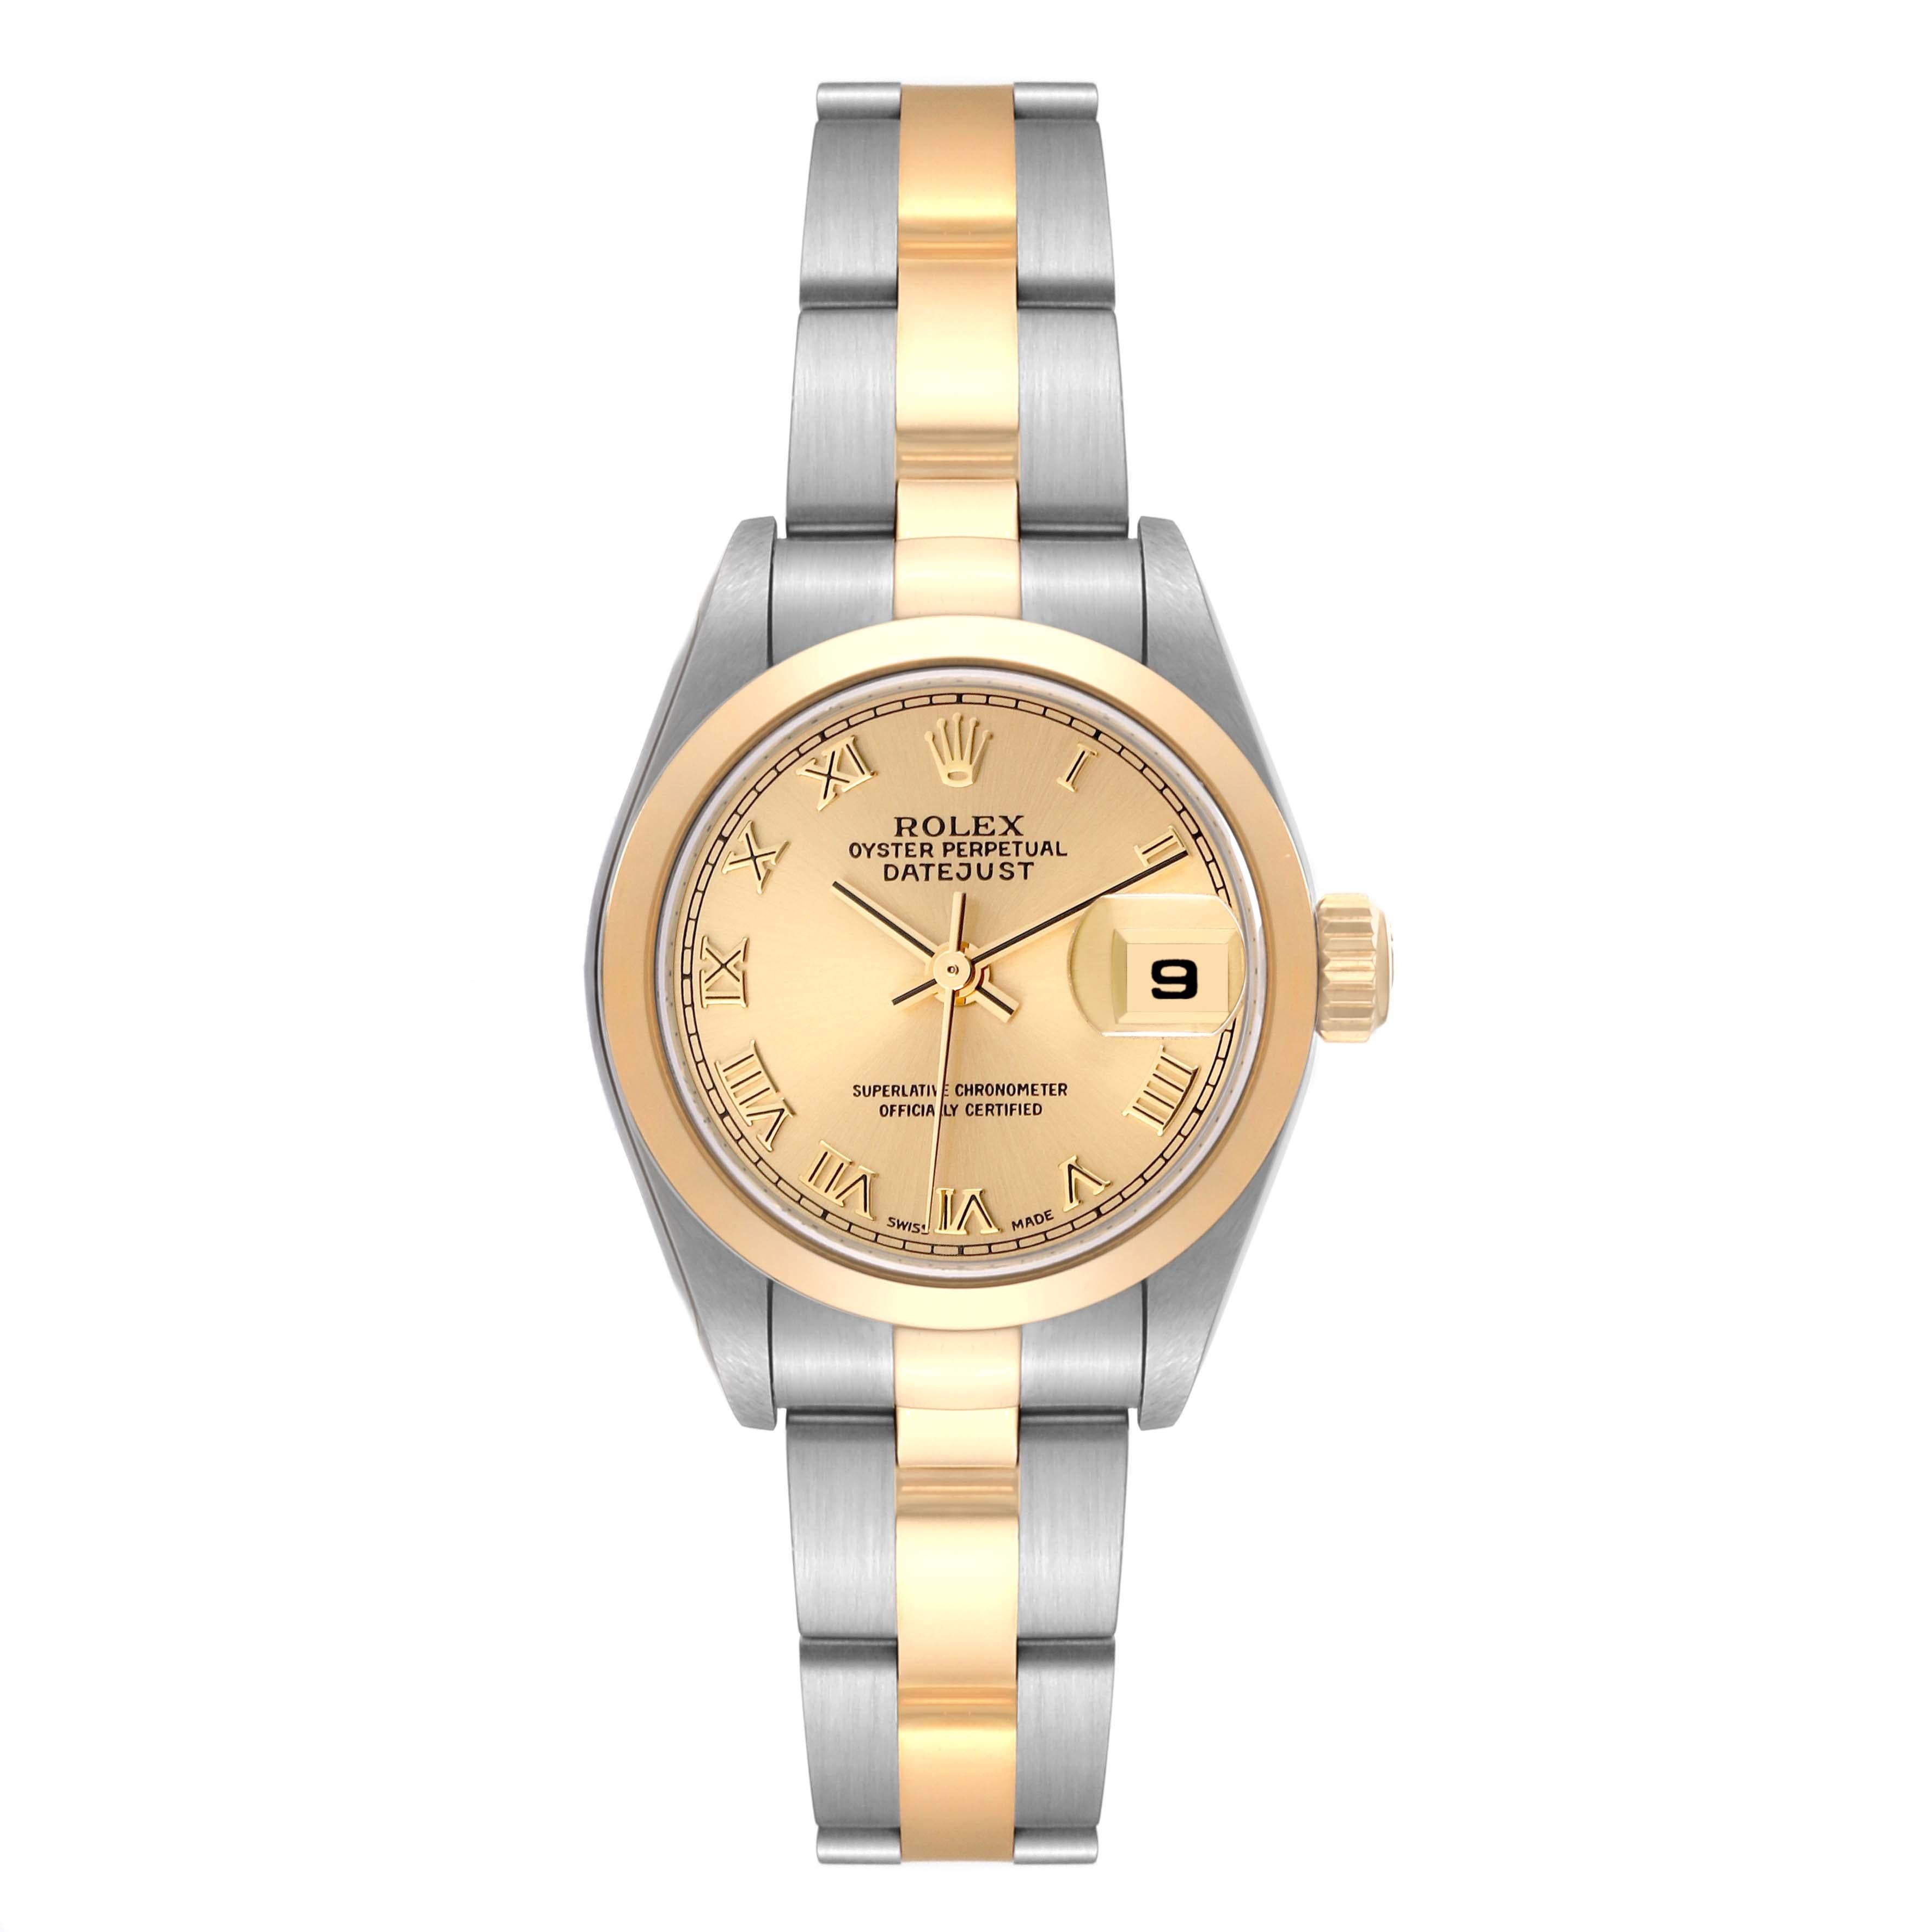 Rolex Datejust Steel Yellow Gold Champagne Dial Ladies Watch 79163 Papers. Officially certified chronometer automatic self-winding movement. Stainless steel oyster case 26 mm in diameter. Rolex logo on 18k yellow gold crown. 18k yellow gold smooth